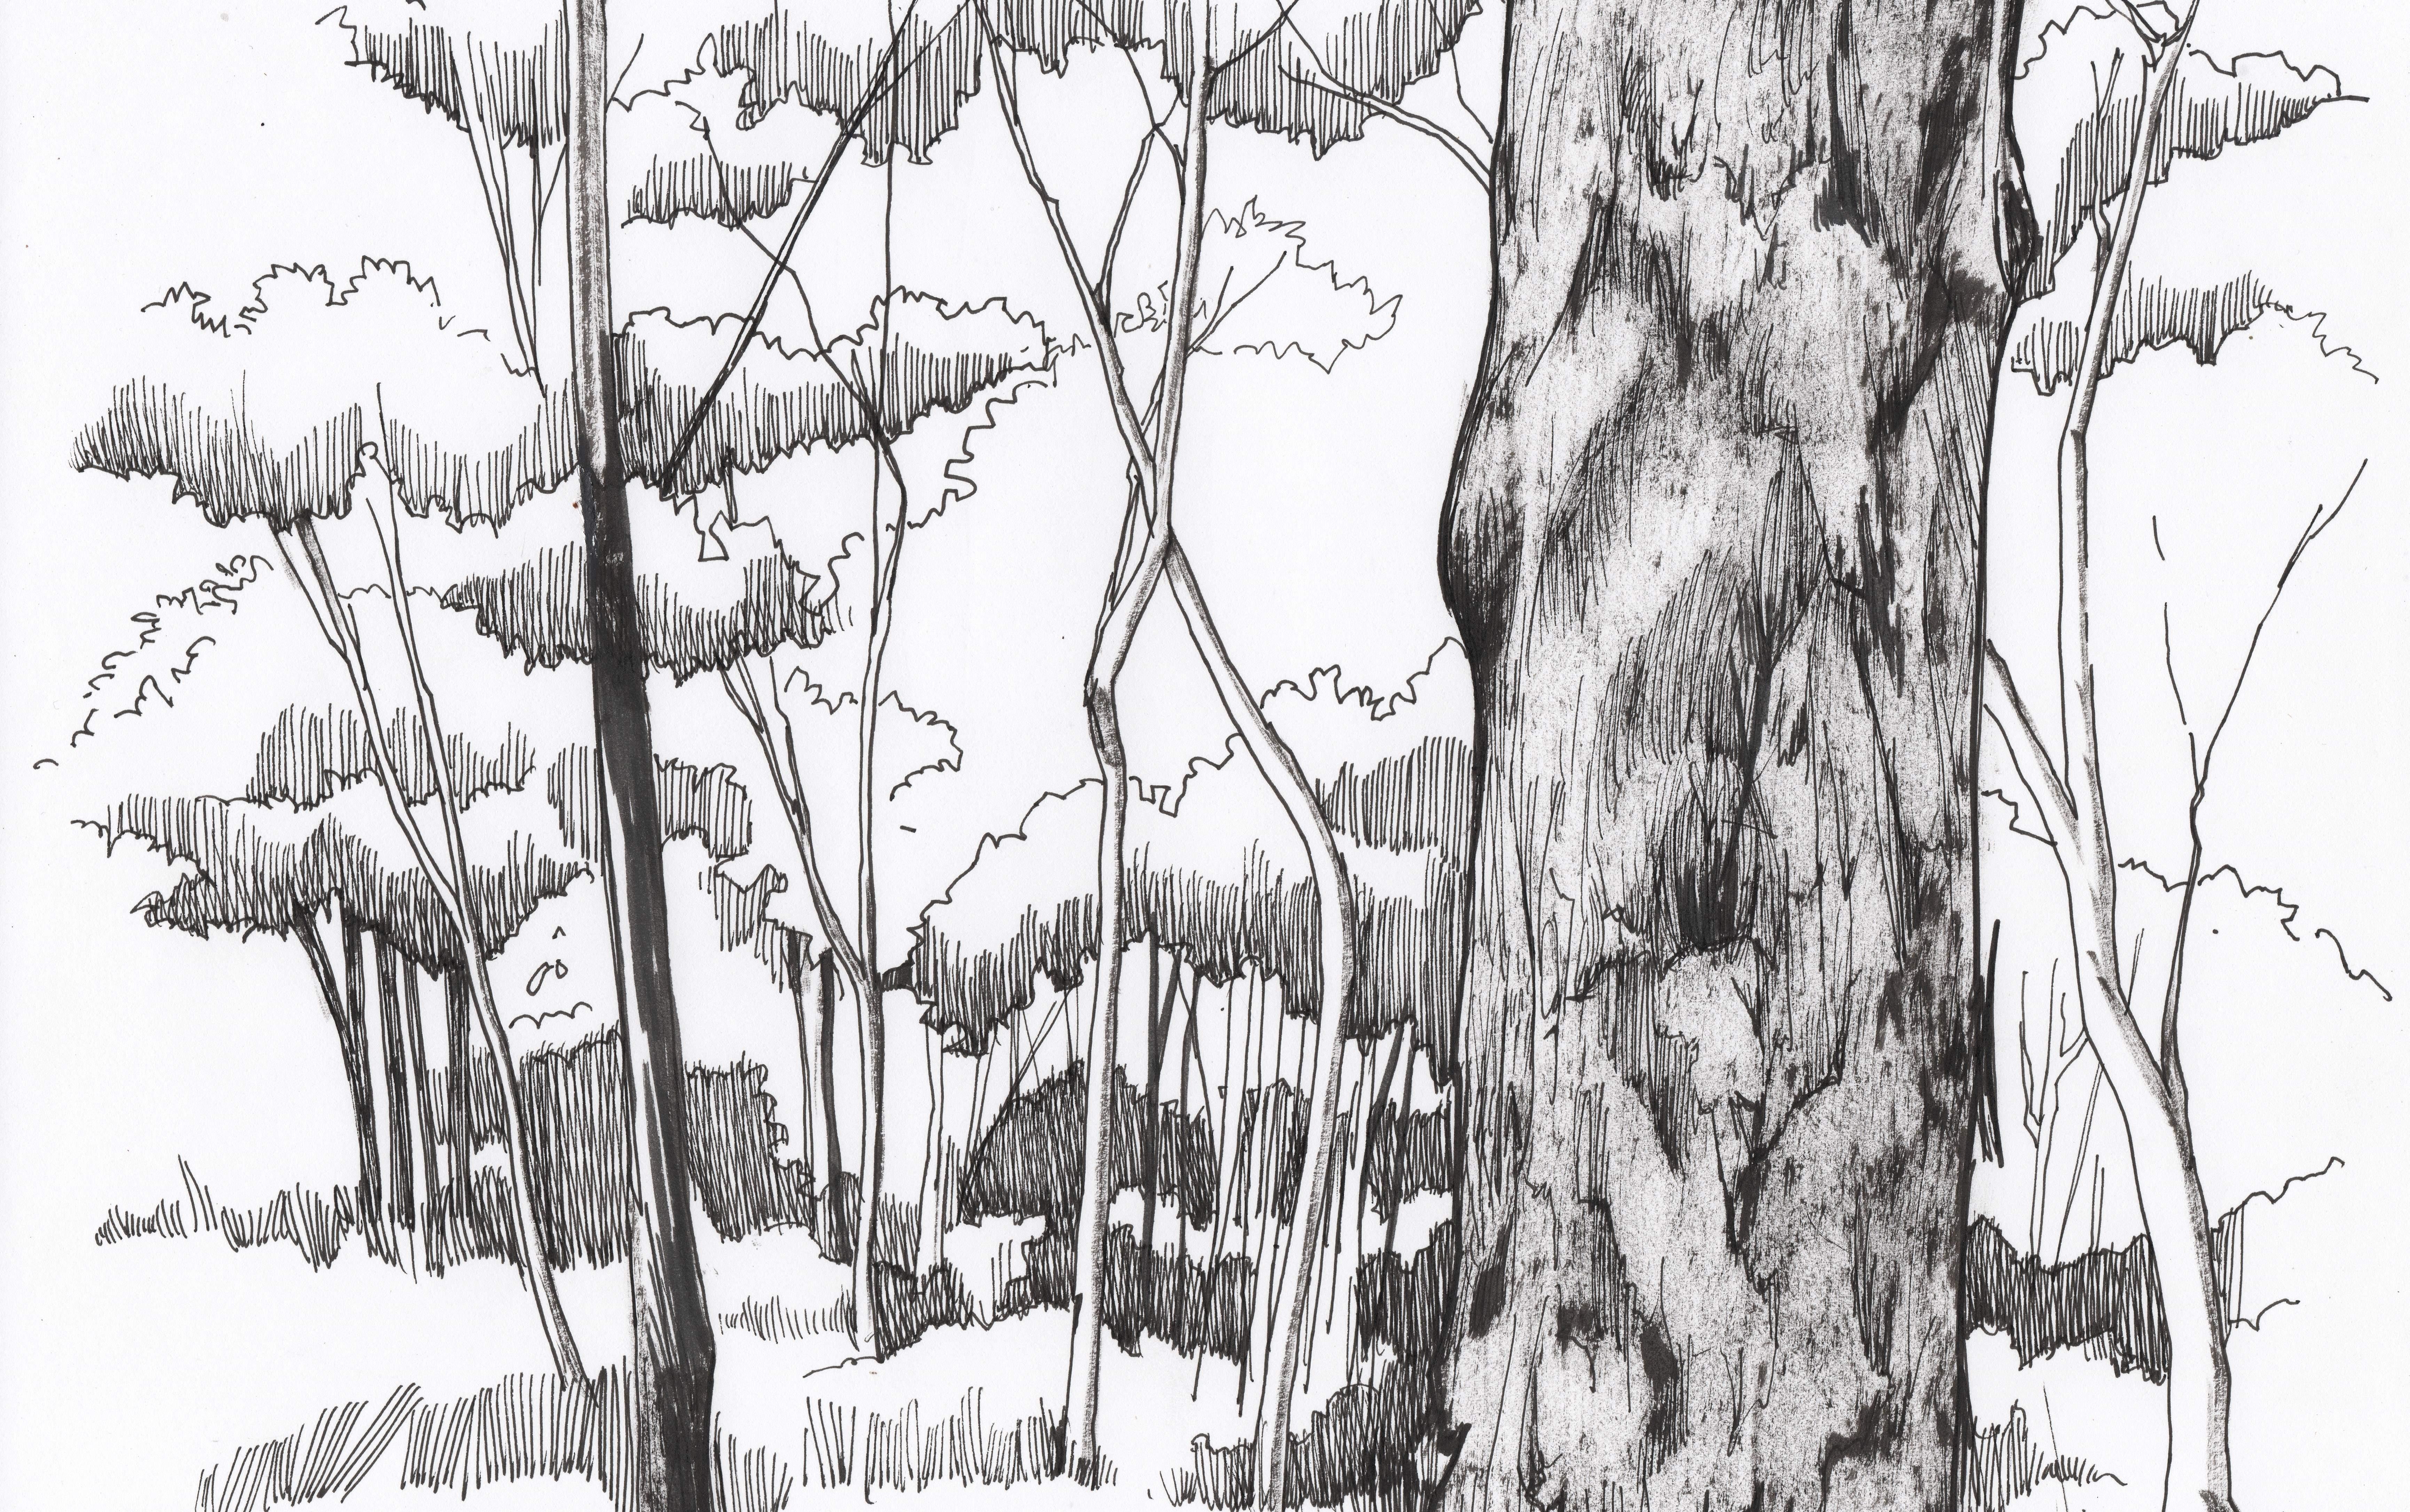 drawing of Eucalypt forest scene